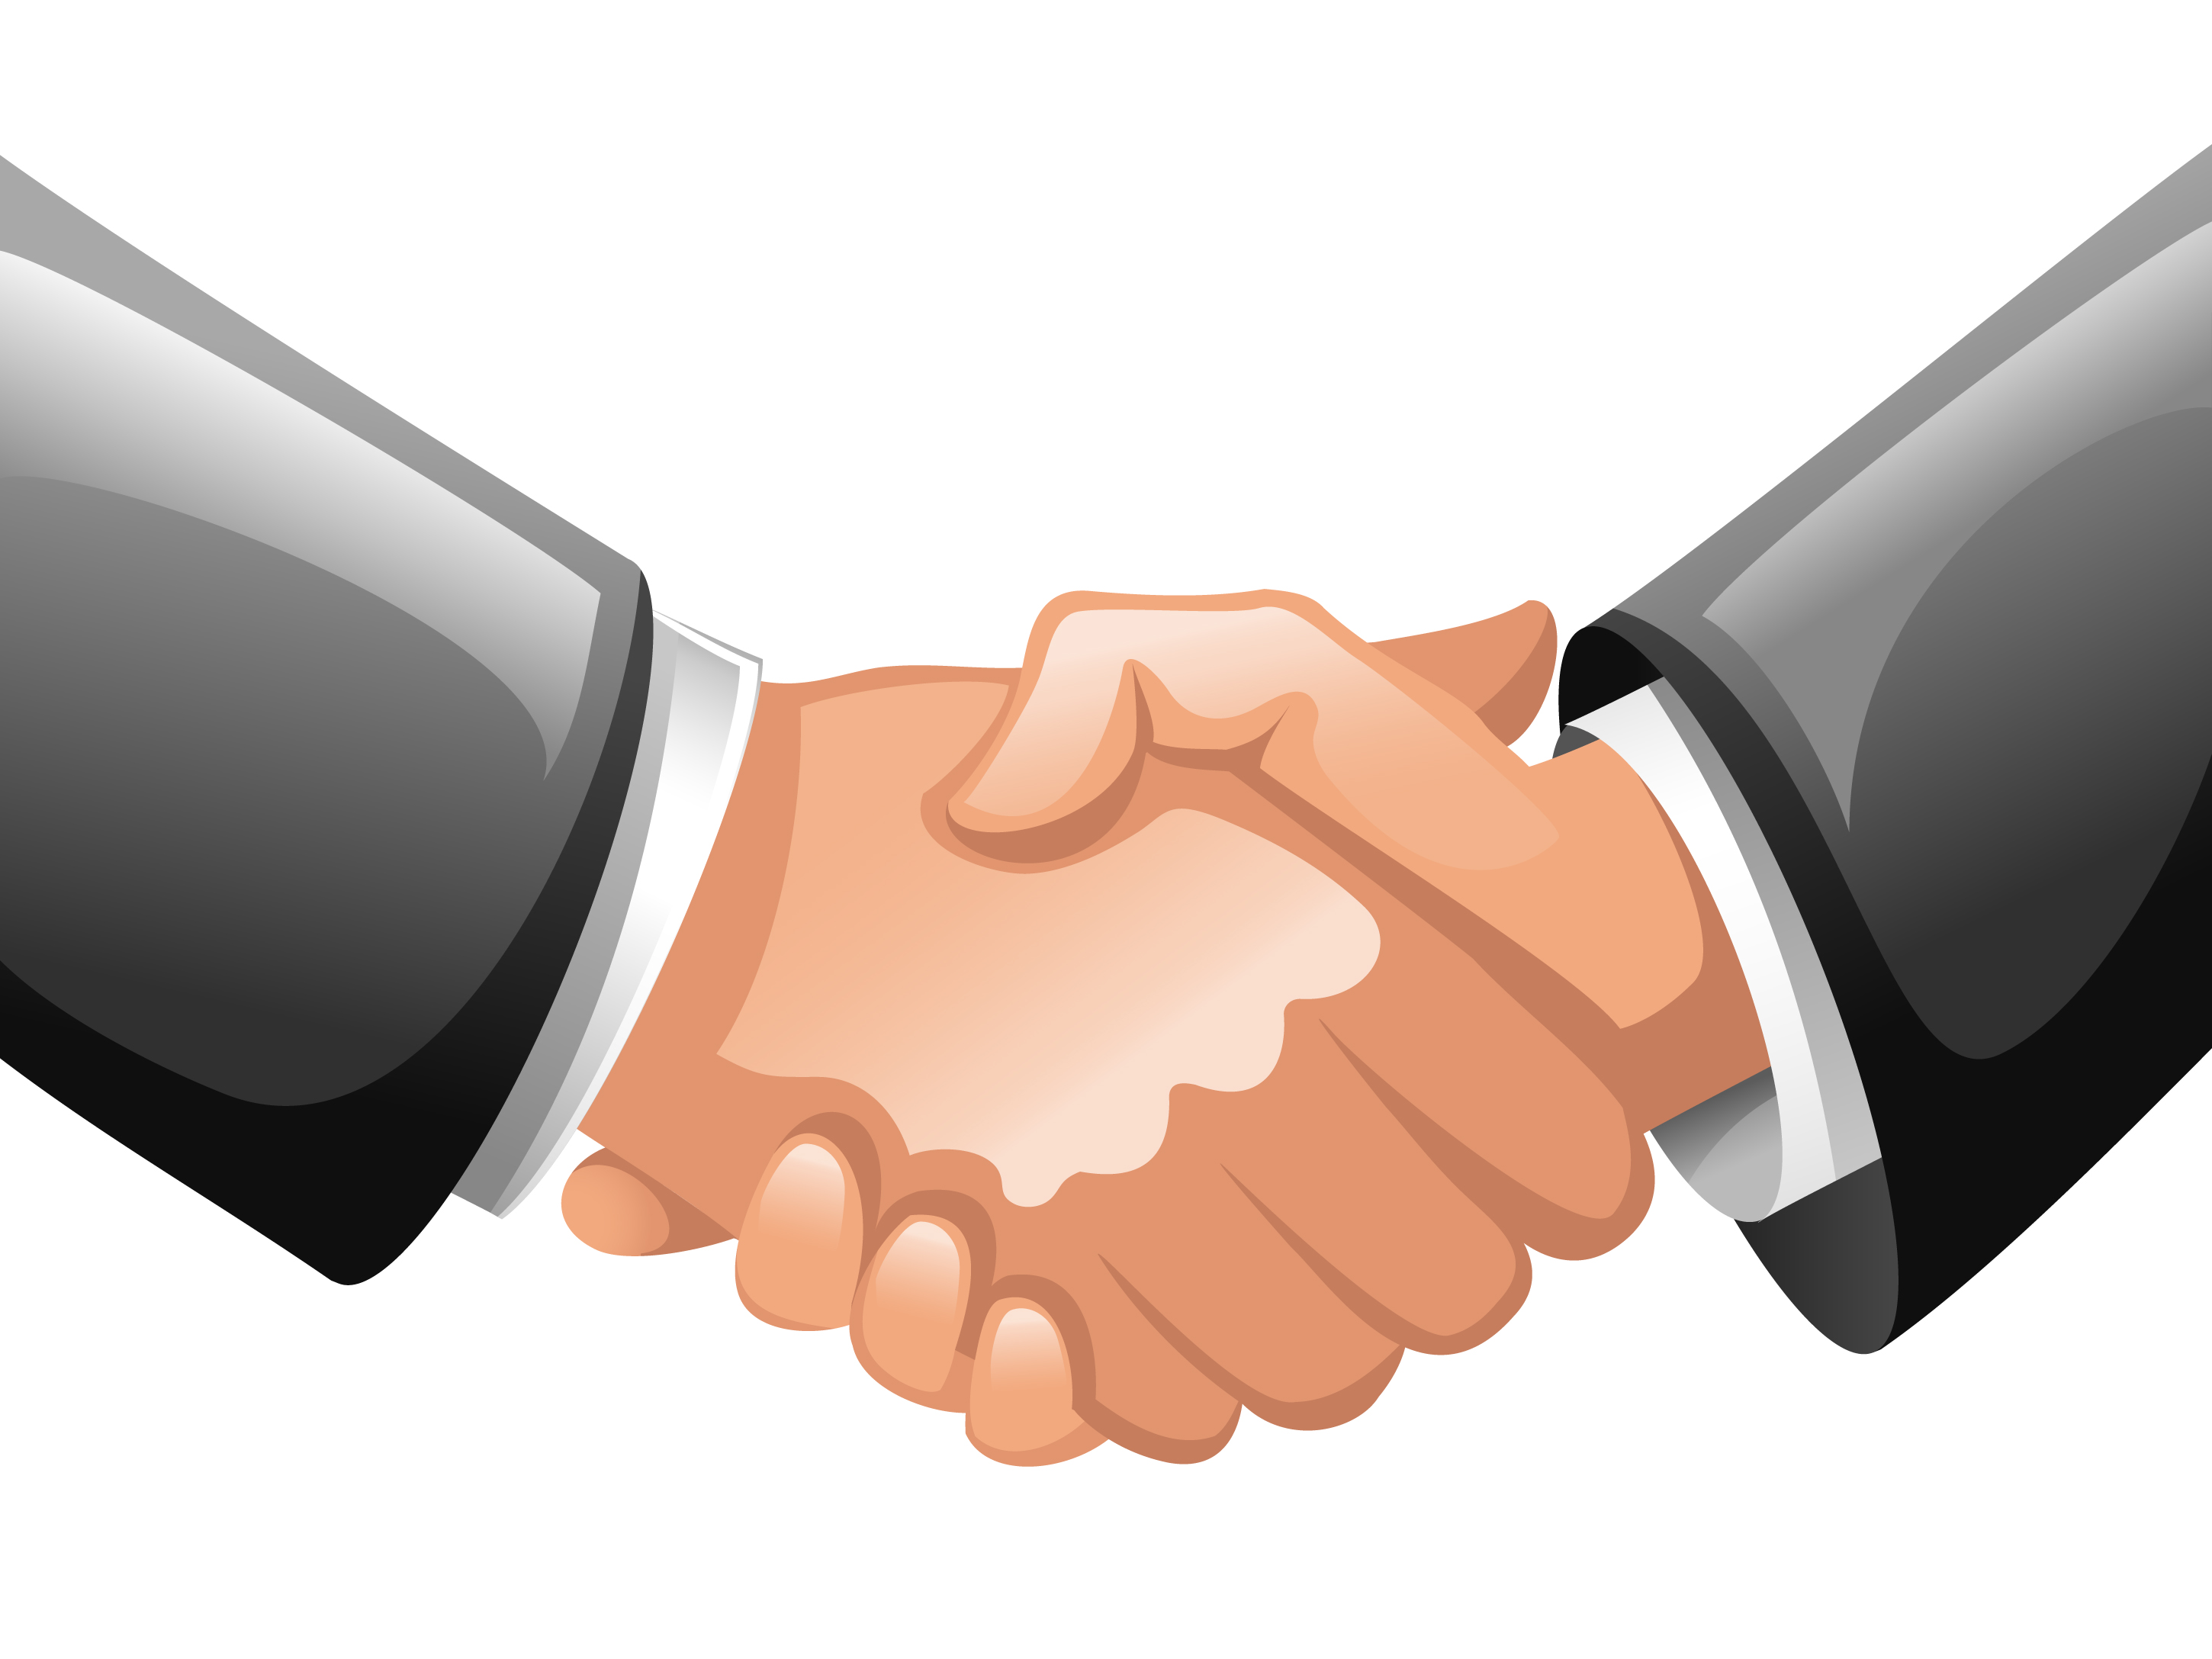 Handshake clipart 6 free images clipartwork 3